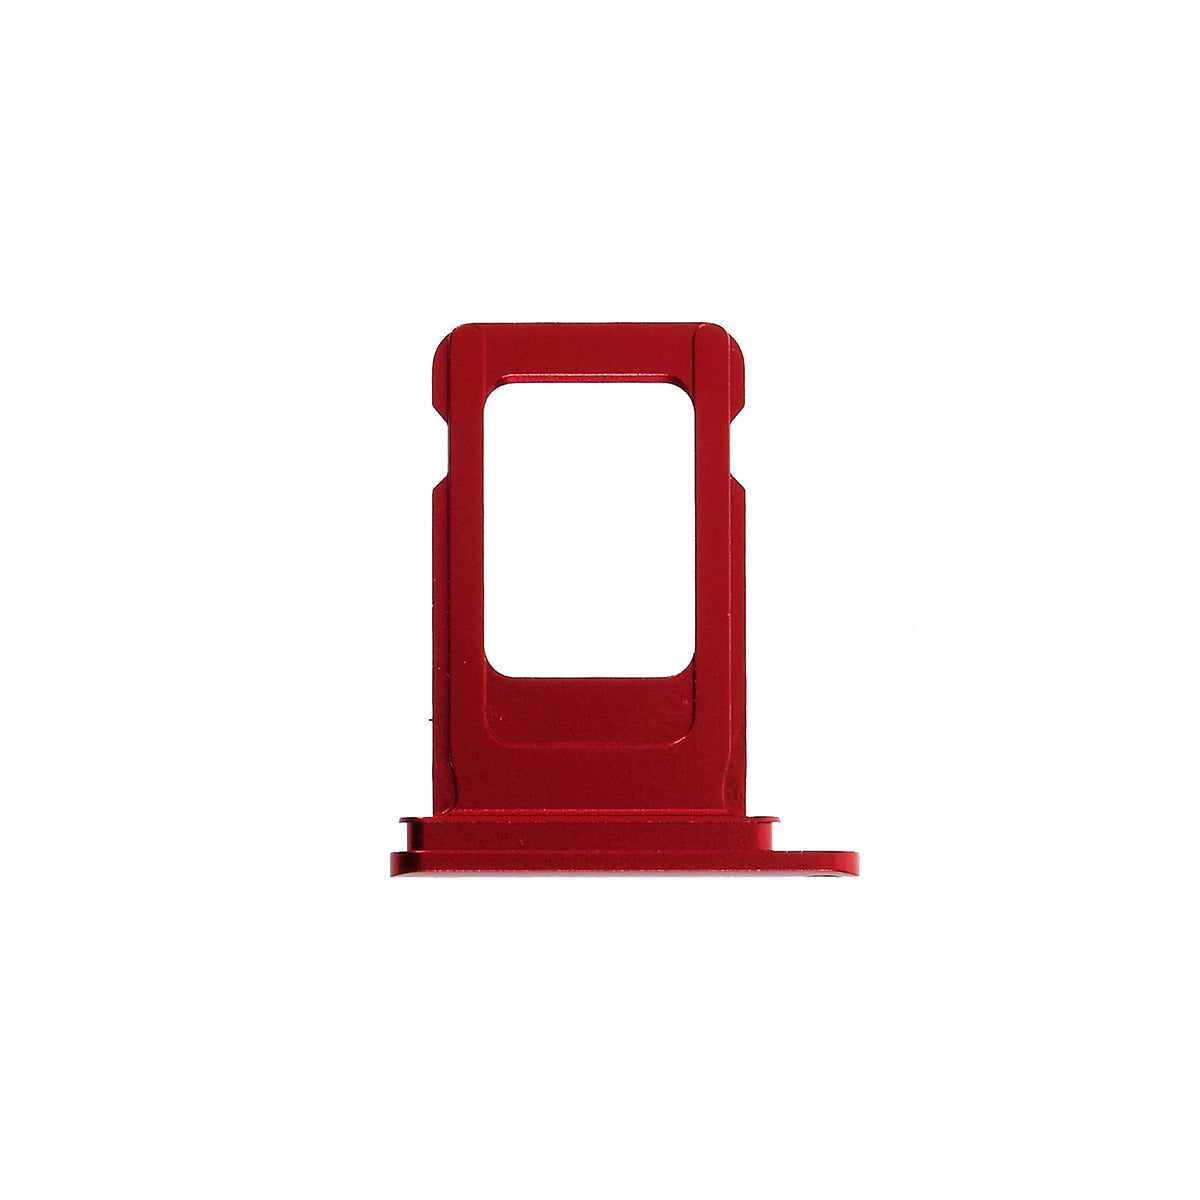 OEM SIM Card Tray Holder Replace Part for Apple iPhone 11 6.1 inch - Red